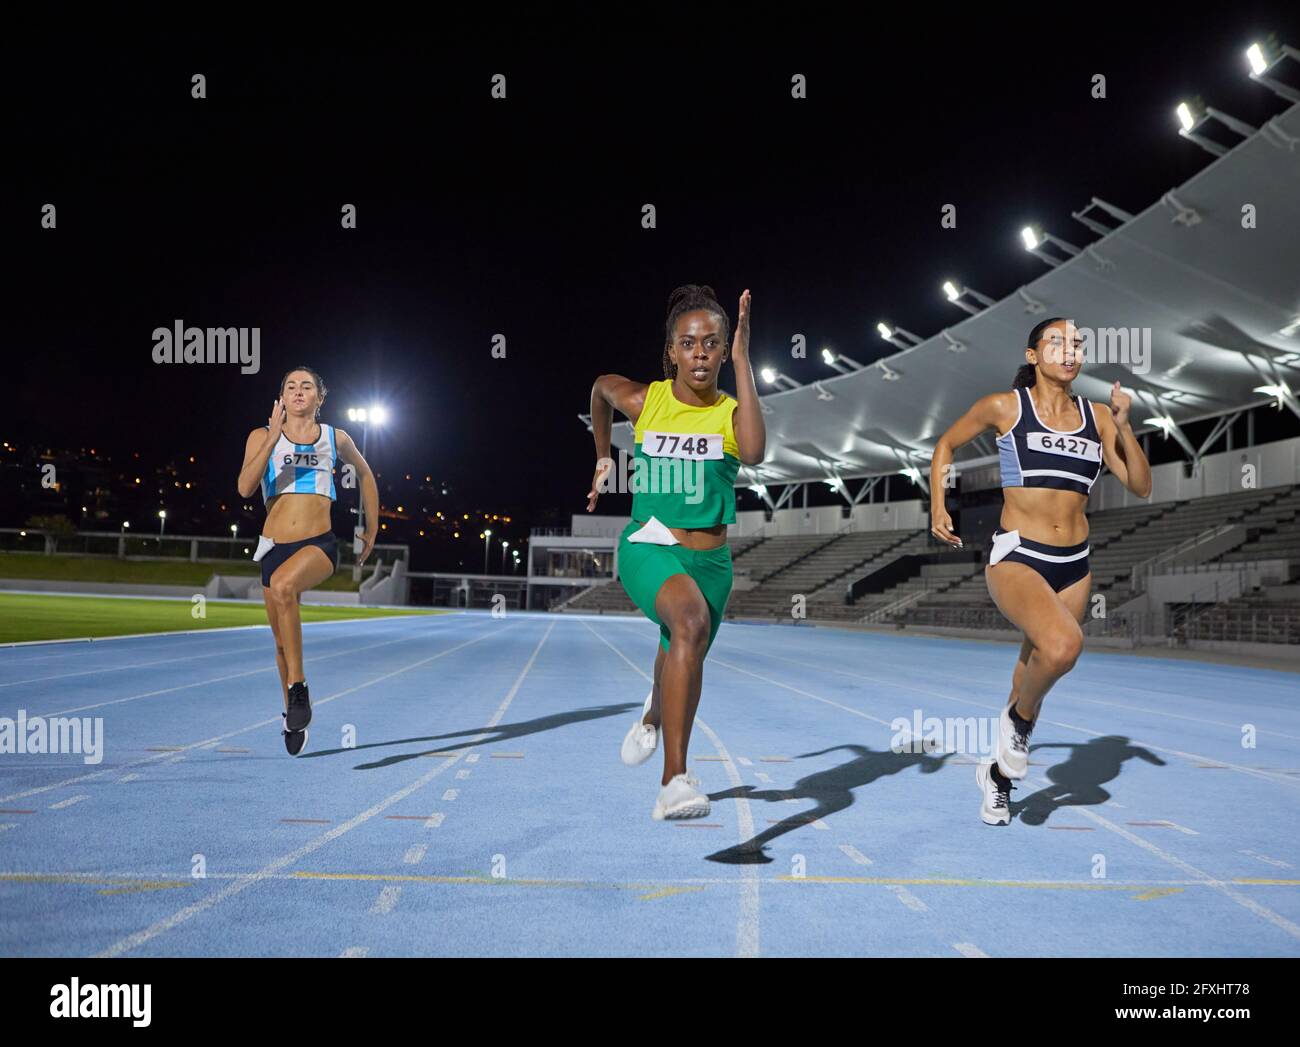 Female track and field athlete running in competition on track Stock Photo